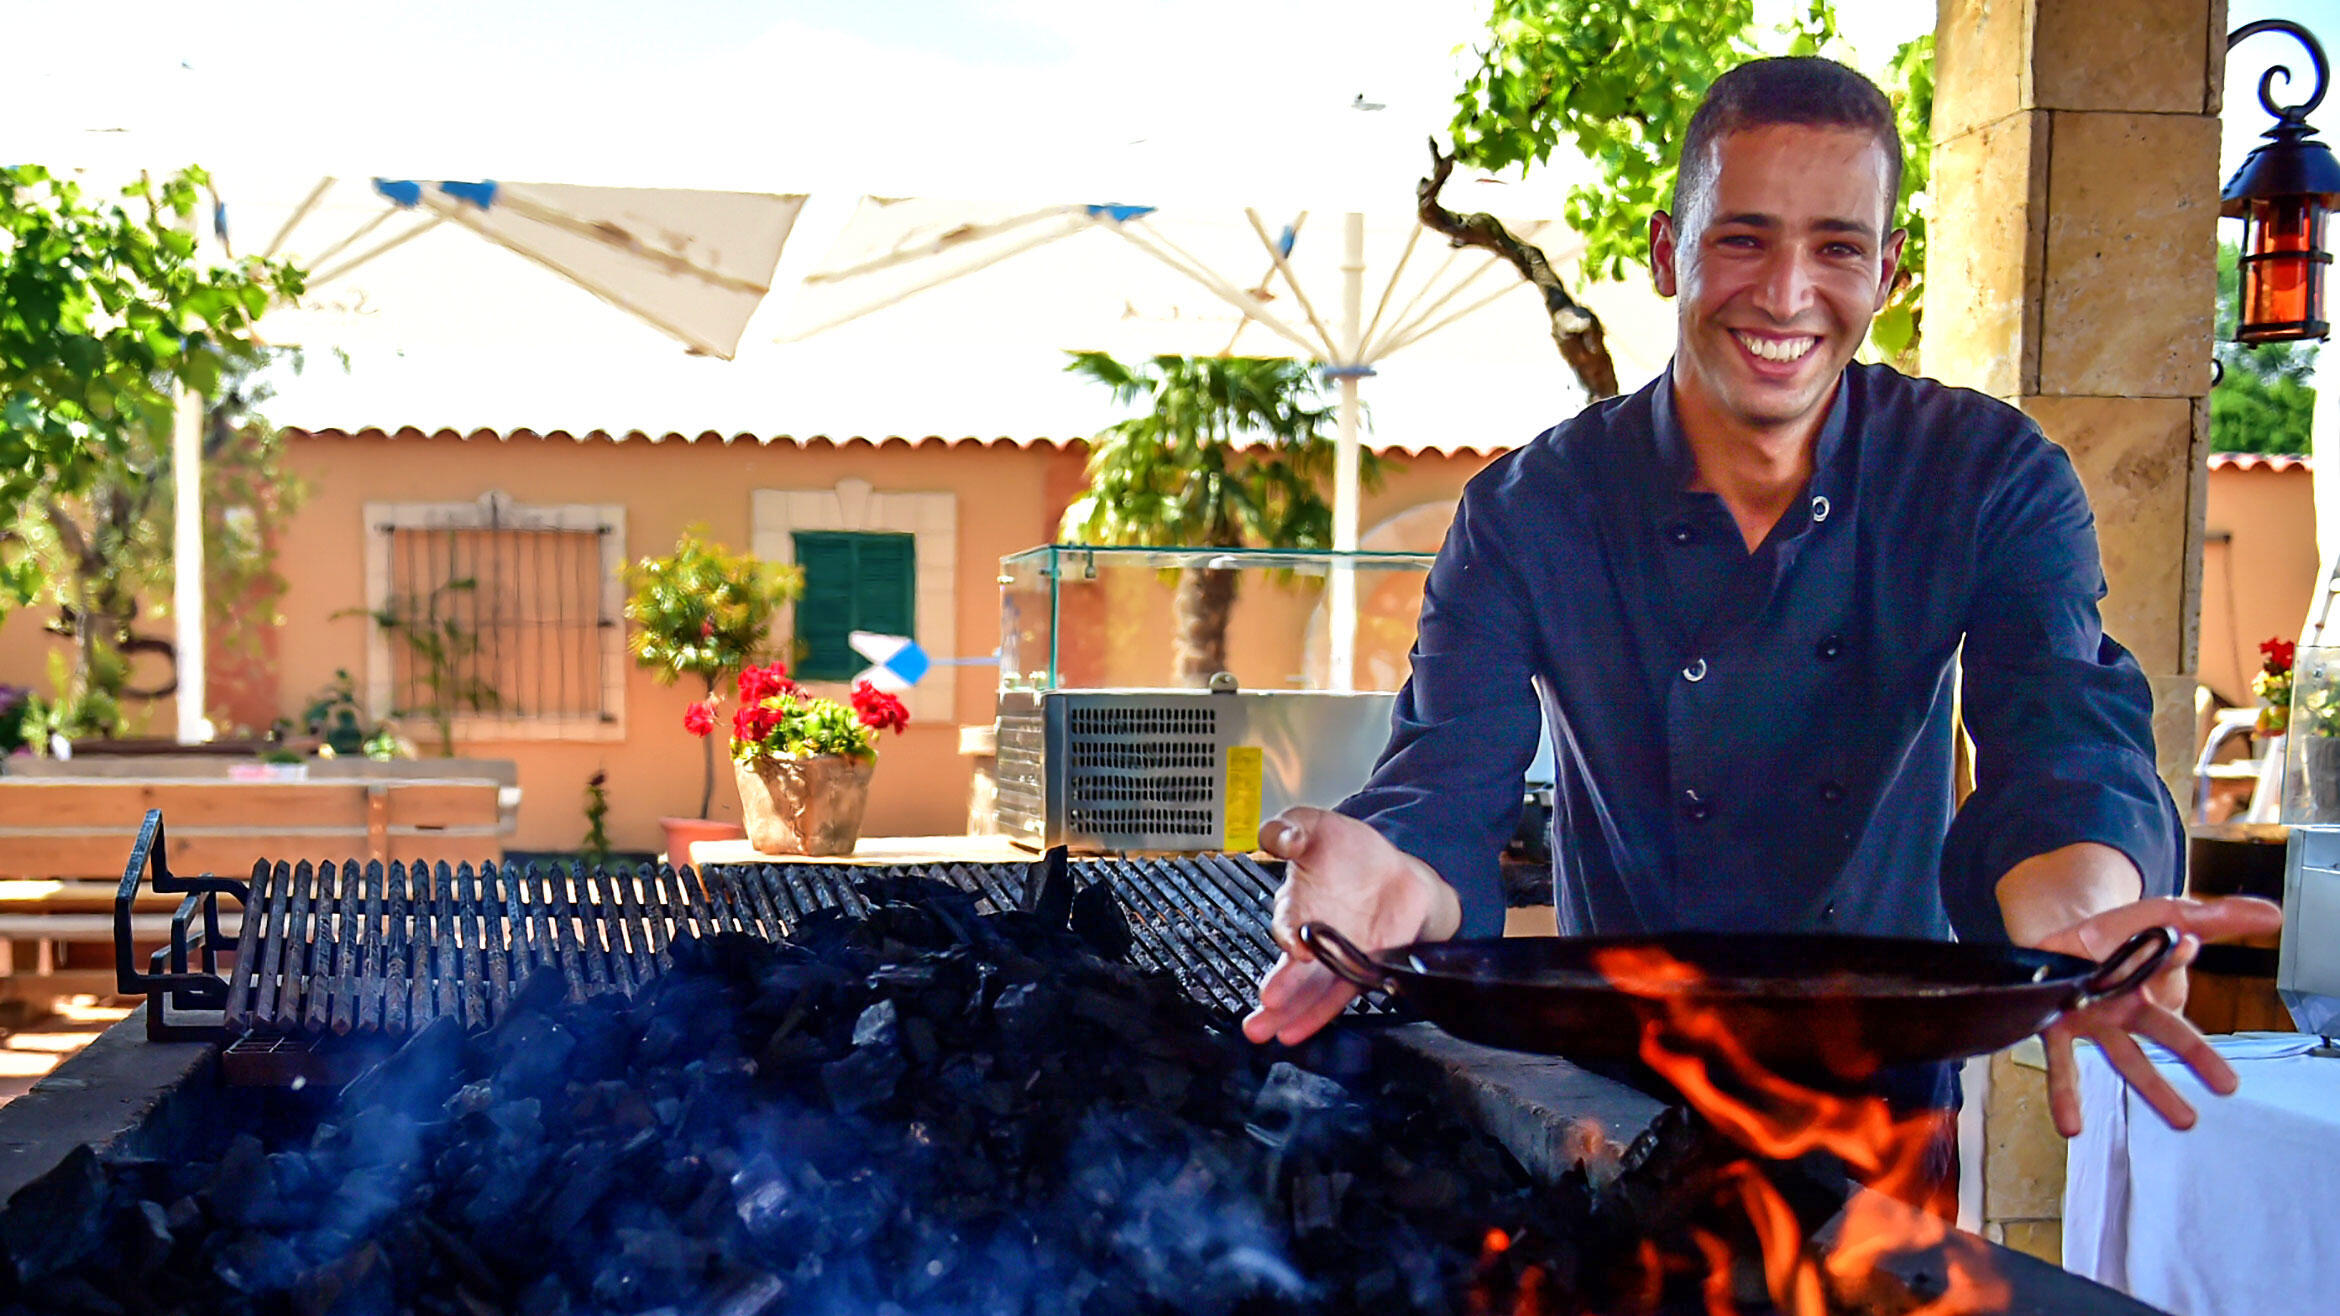 young man holds a pan over a grill fire and smiles into the camera